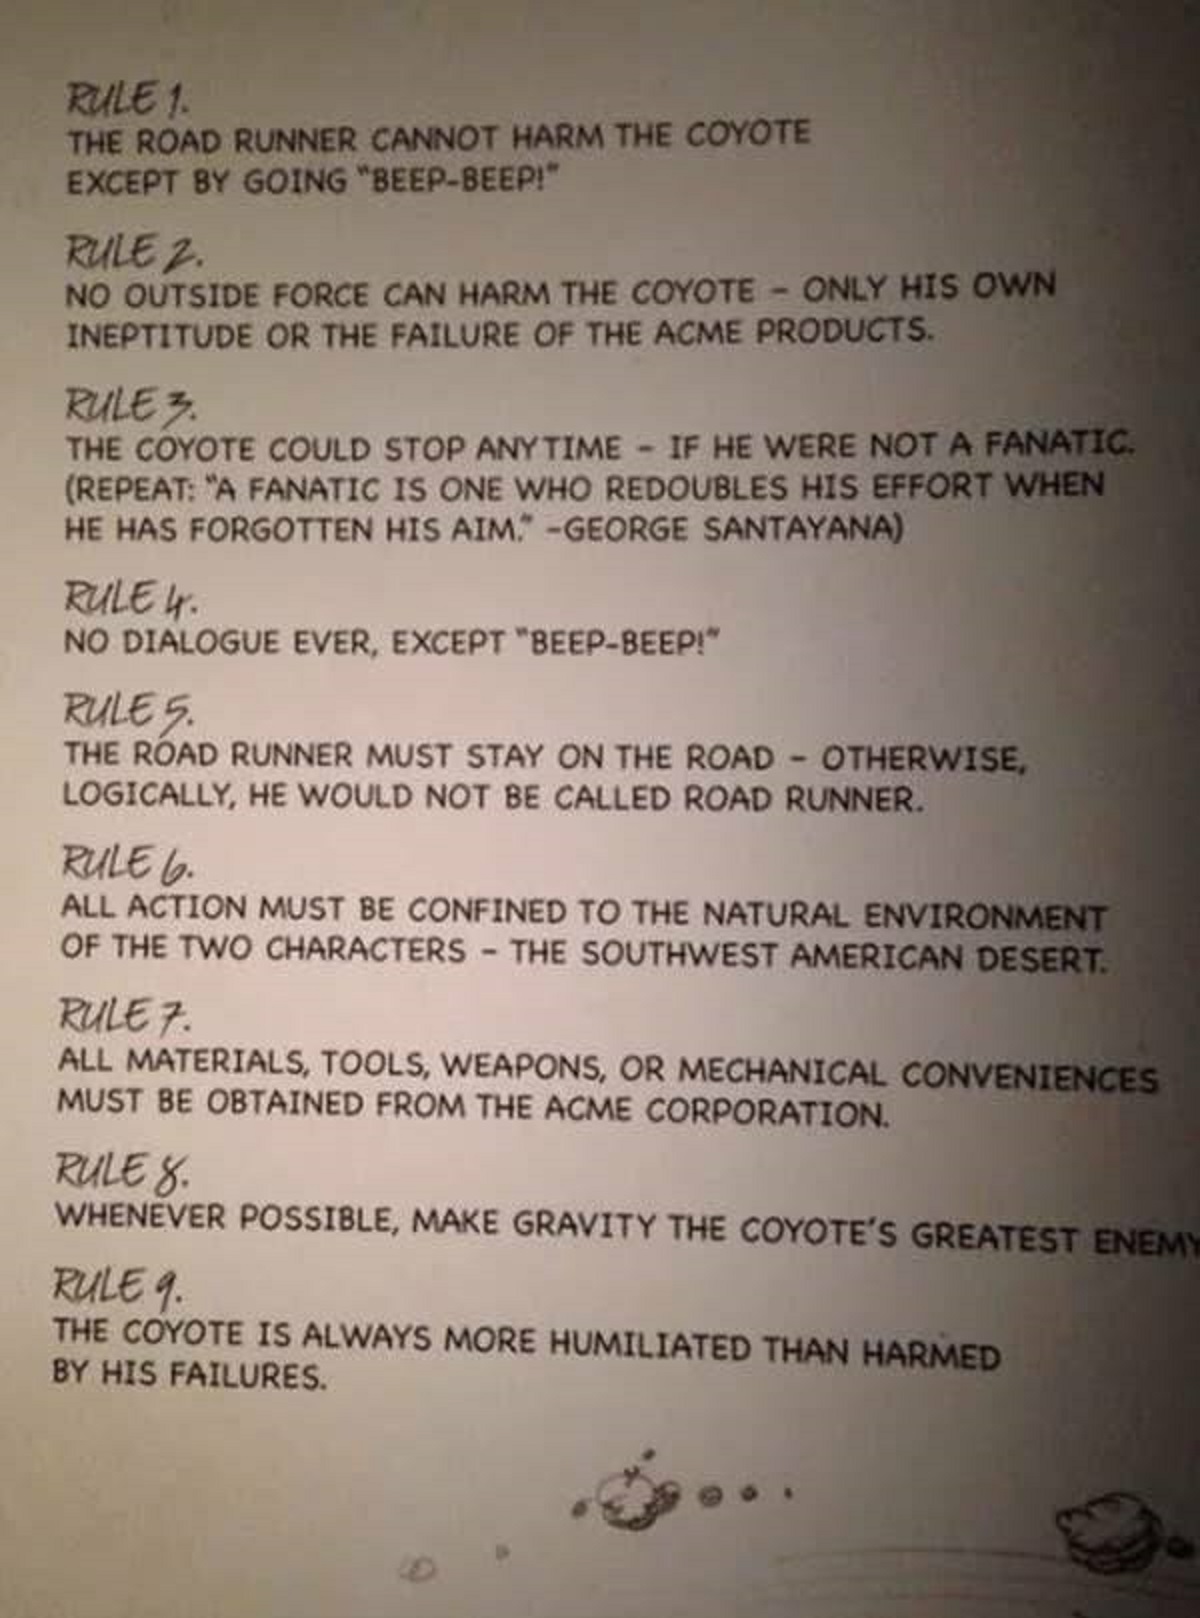 Here are the rules to writing Wile E. Coyote and Road Runner shorts, straight from creator, Chuck Jones.